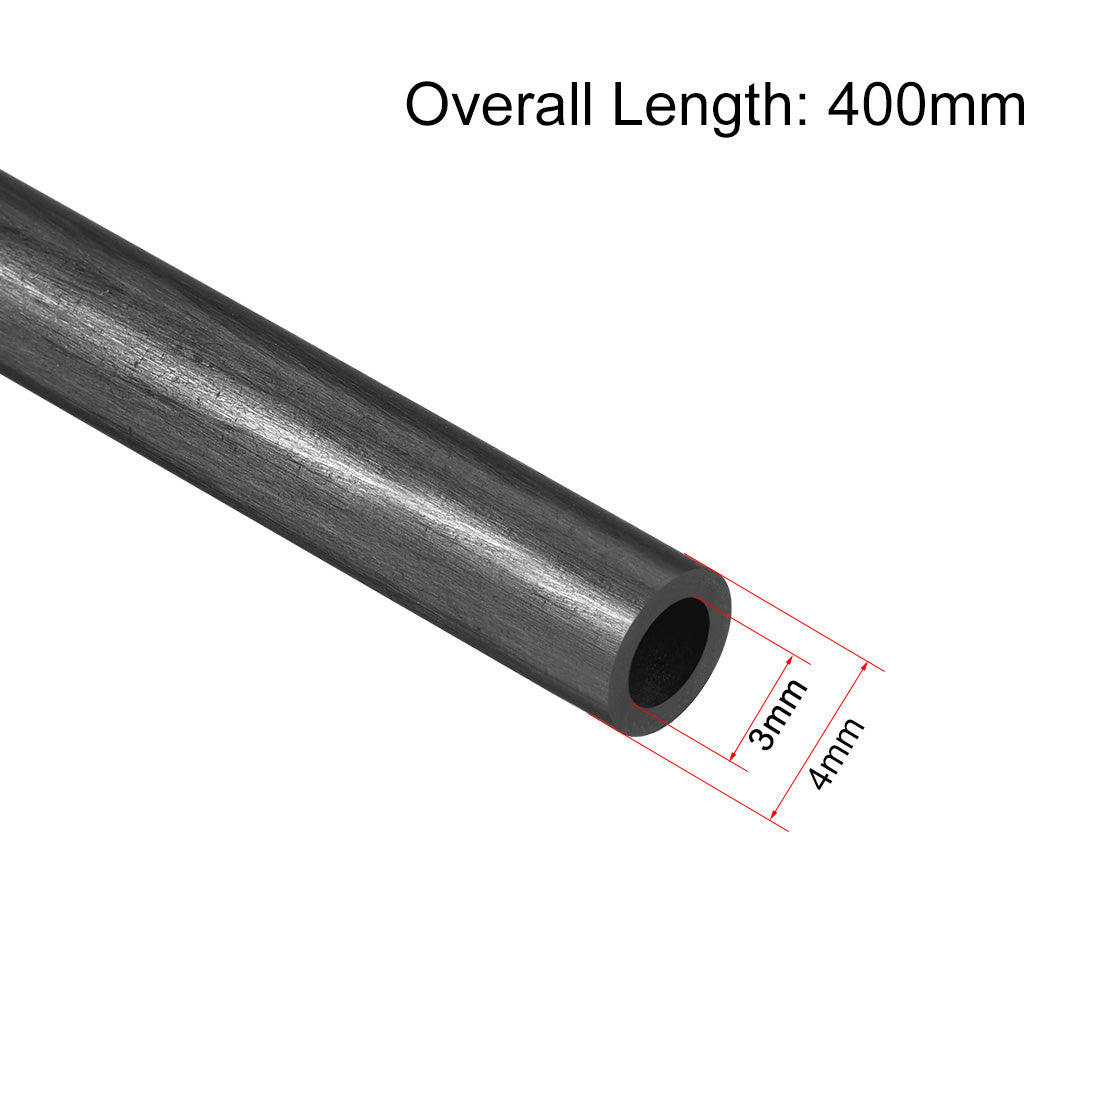 uxcell Uxcell Carbon Fiber Round Tube 4mm x 3mm x 400mm Carbon Fiber Wing Pultrusion Tubing for RC Airplane Quadcopter 2 Pcs